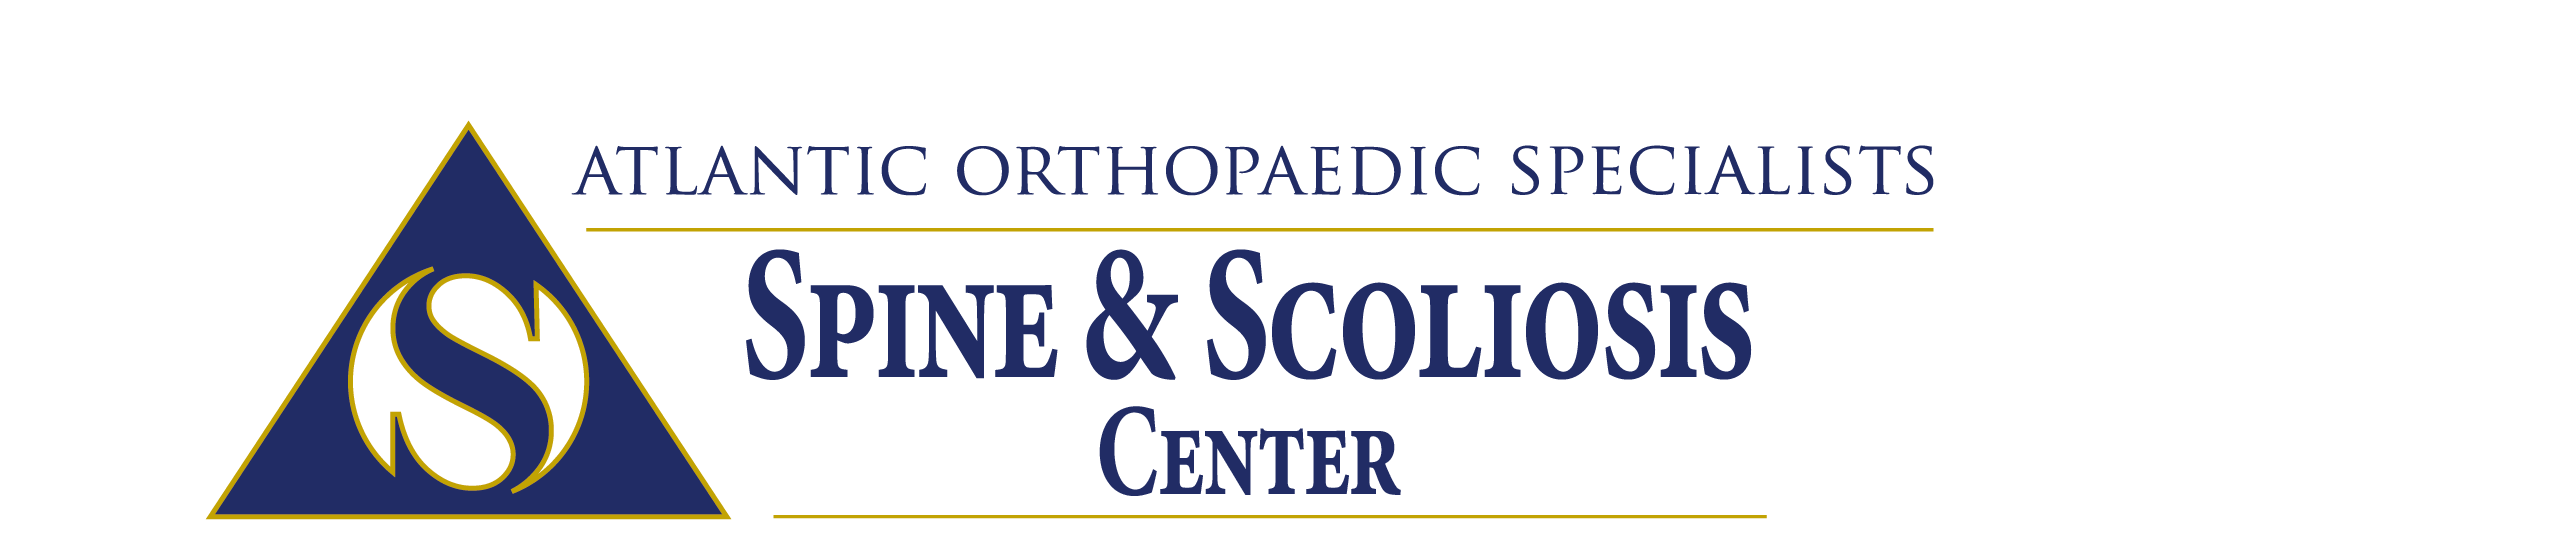 Spine and Scoliosis Center Logo